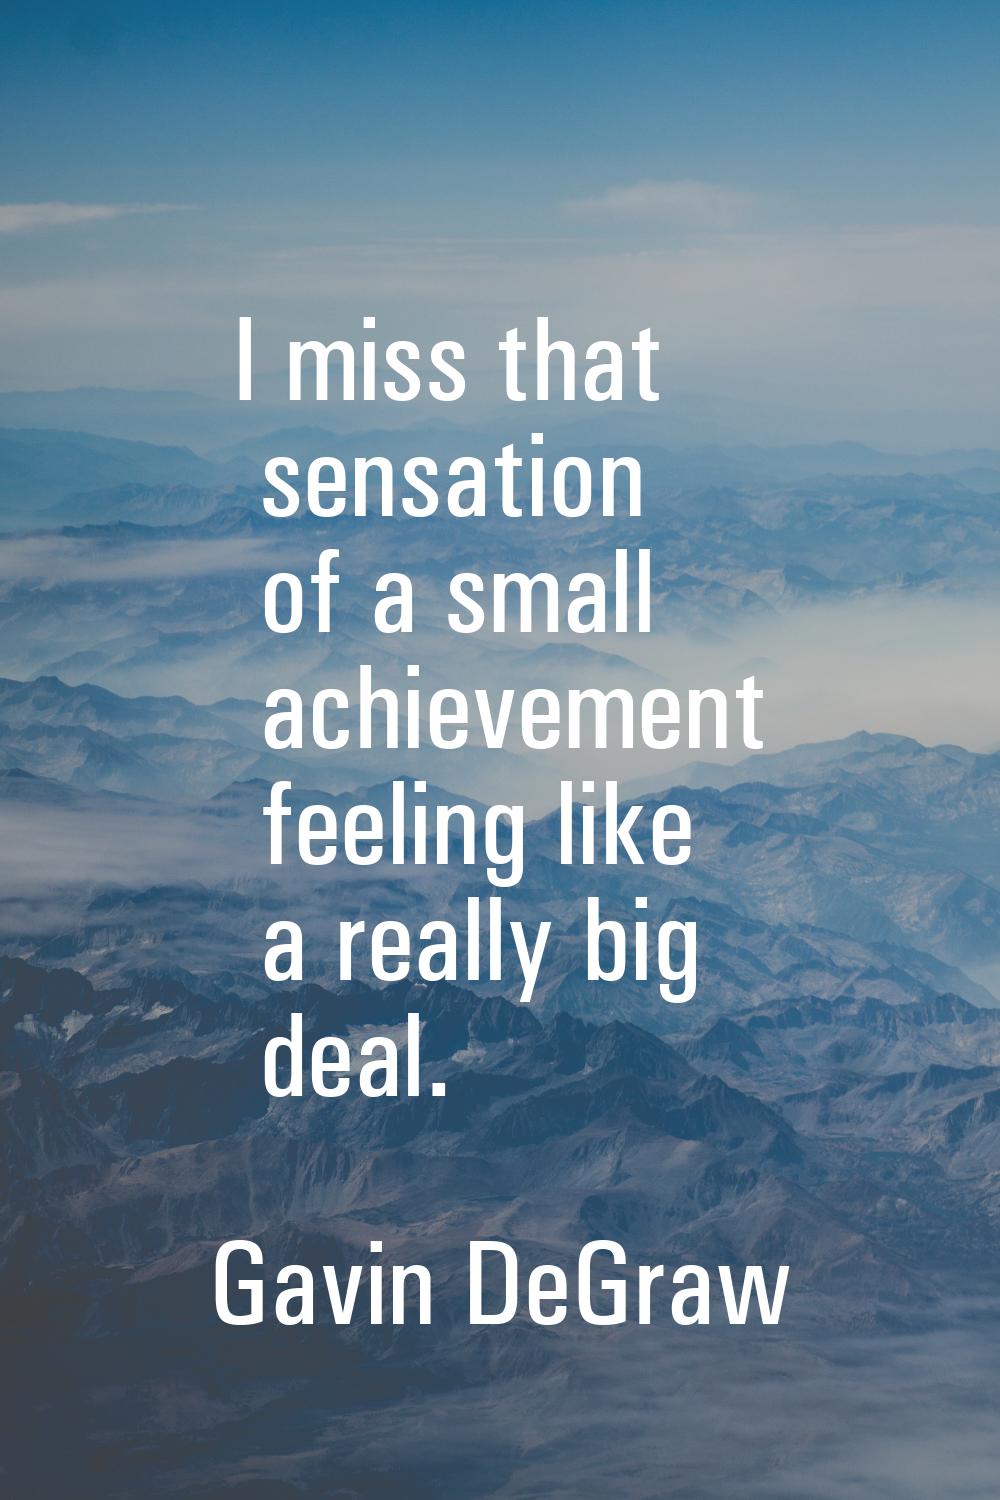 I miss that sensation of a small achievement feeling like a really big deal.